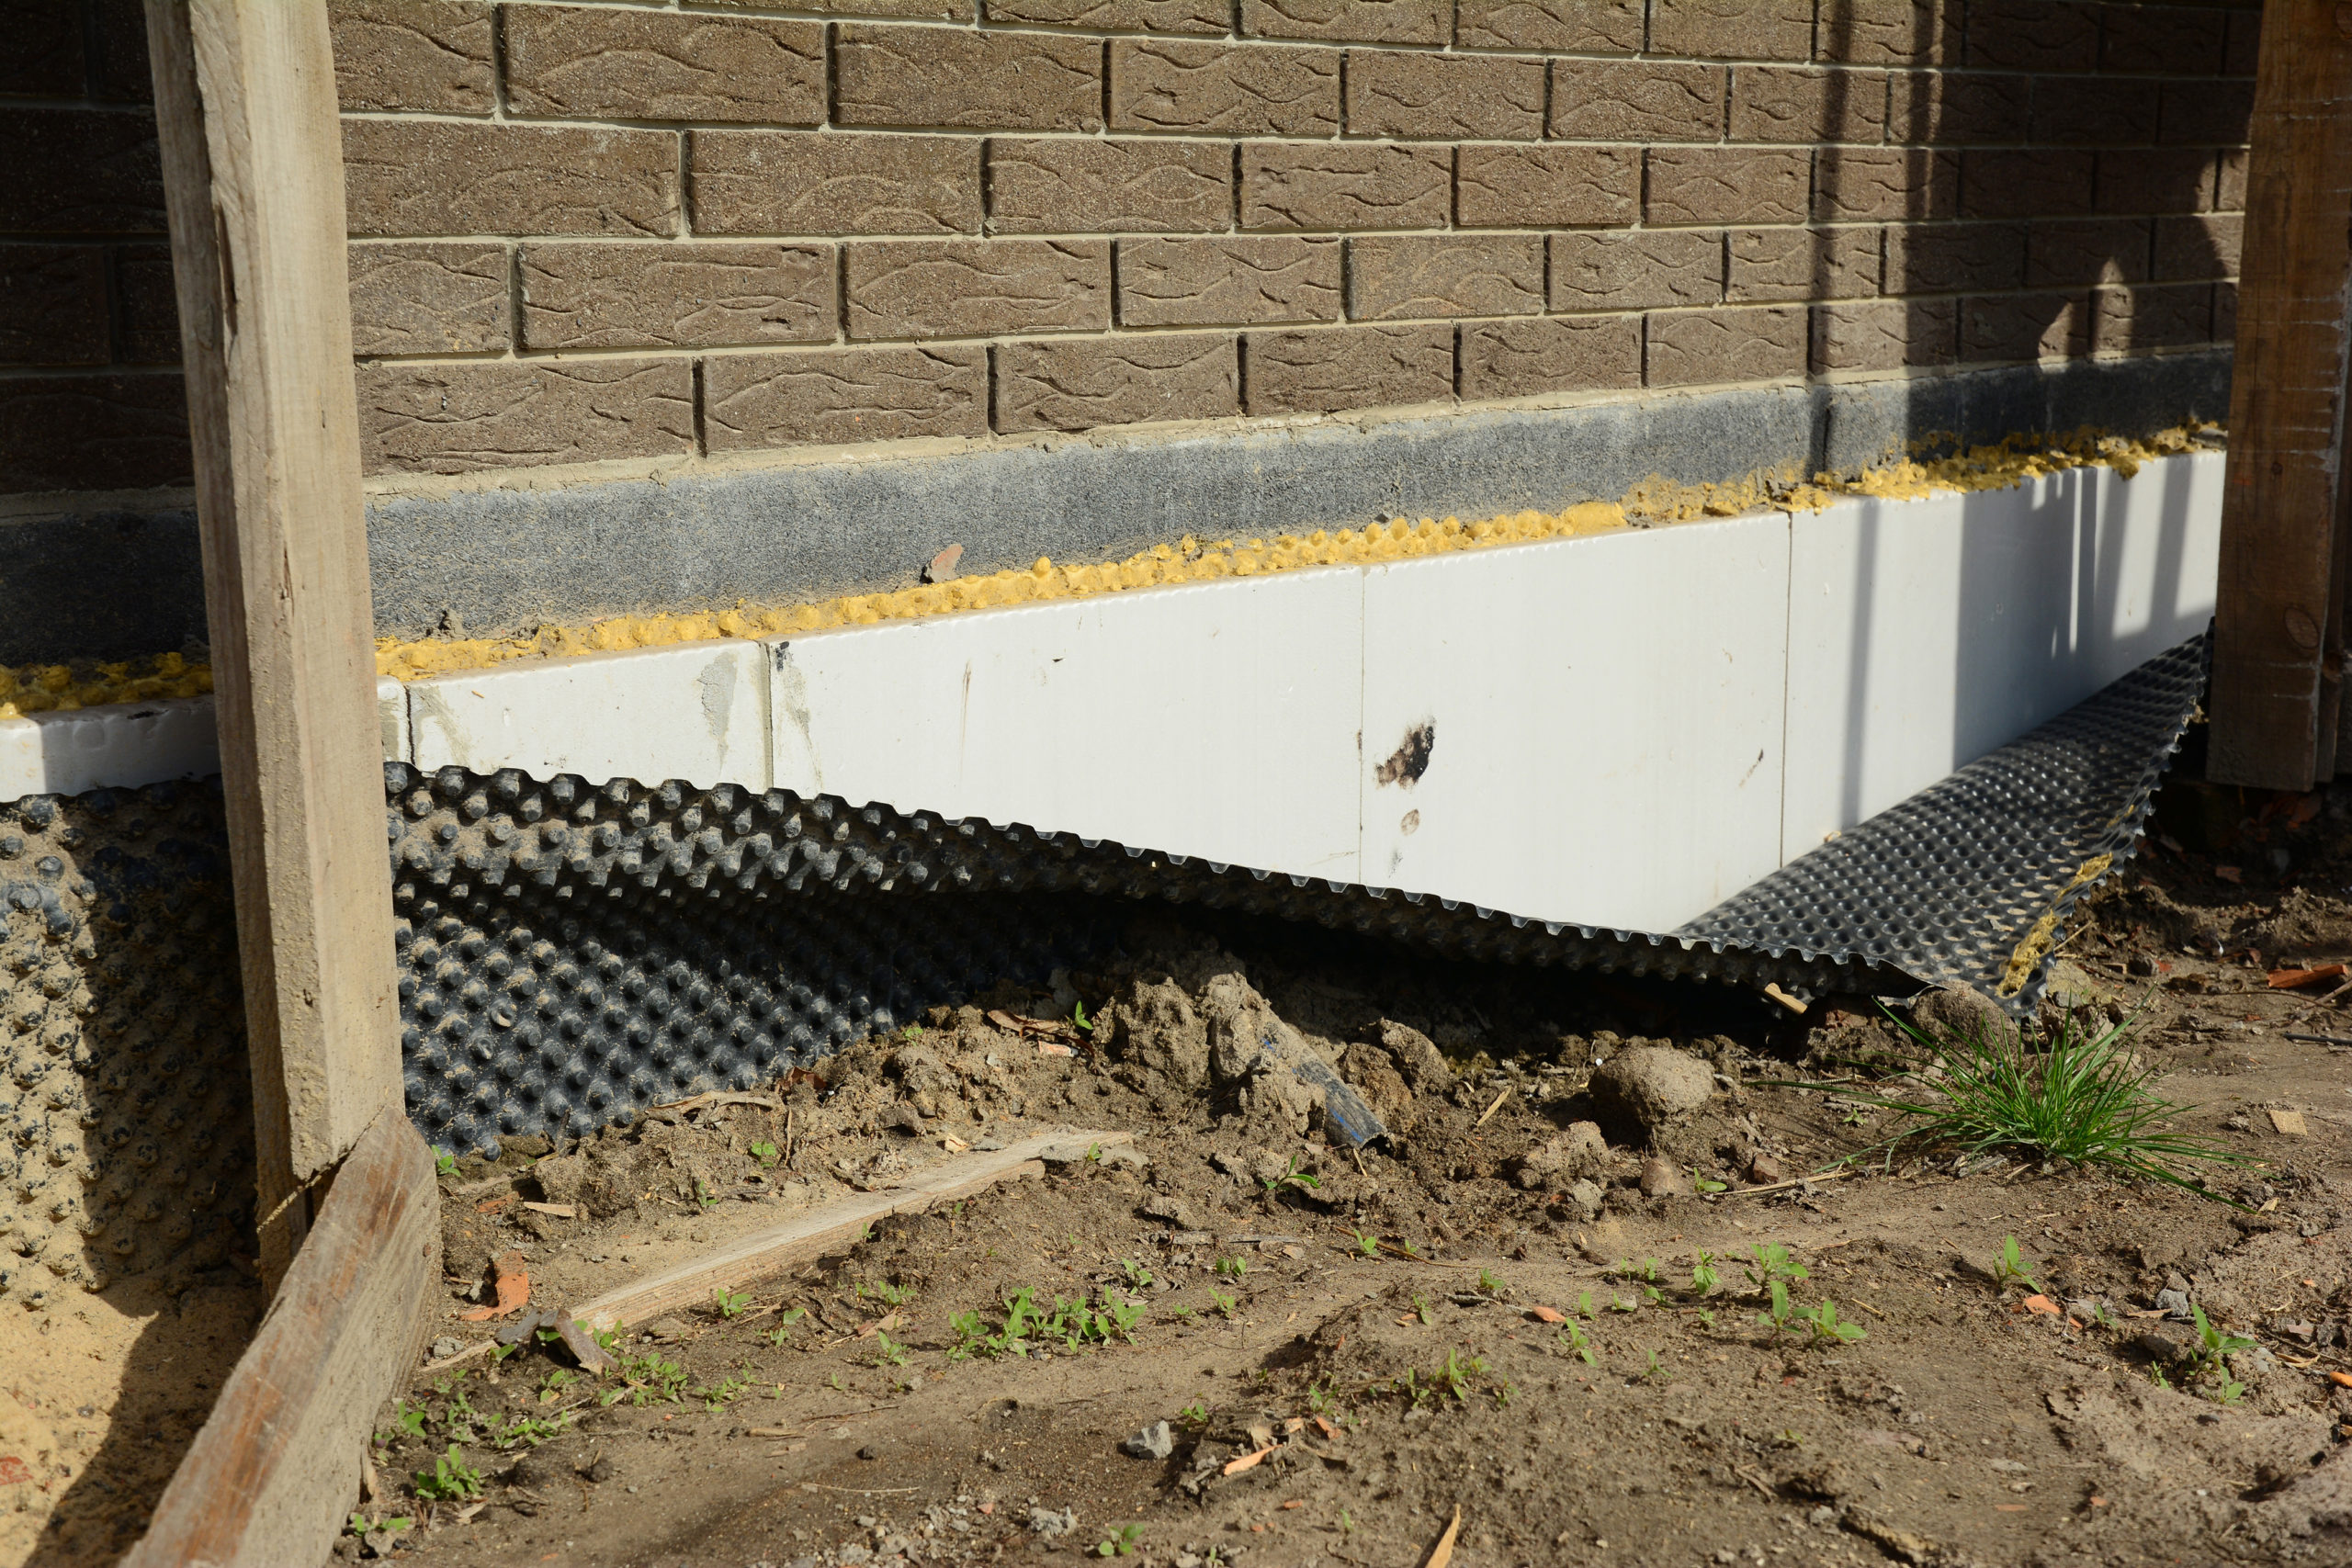 An external membrane has fallen away from the concrete foundation it was applied to.